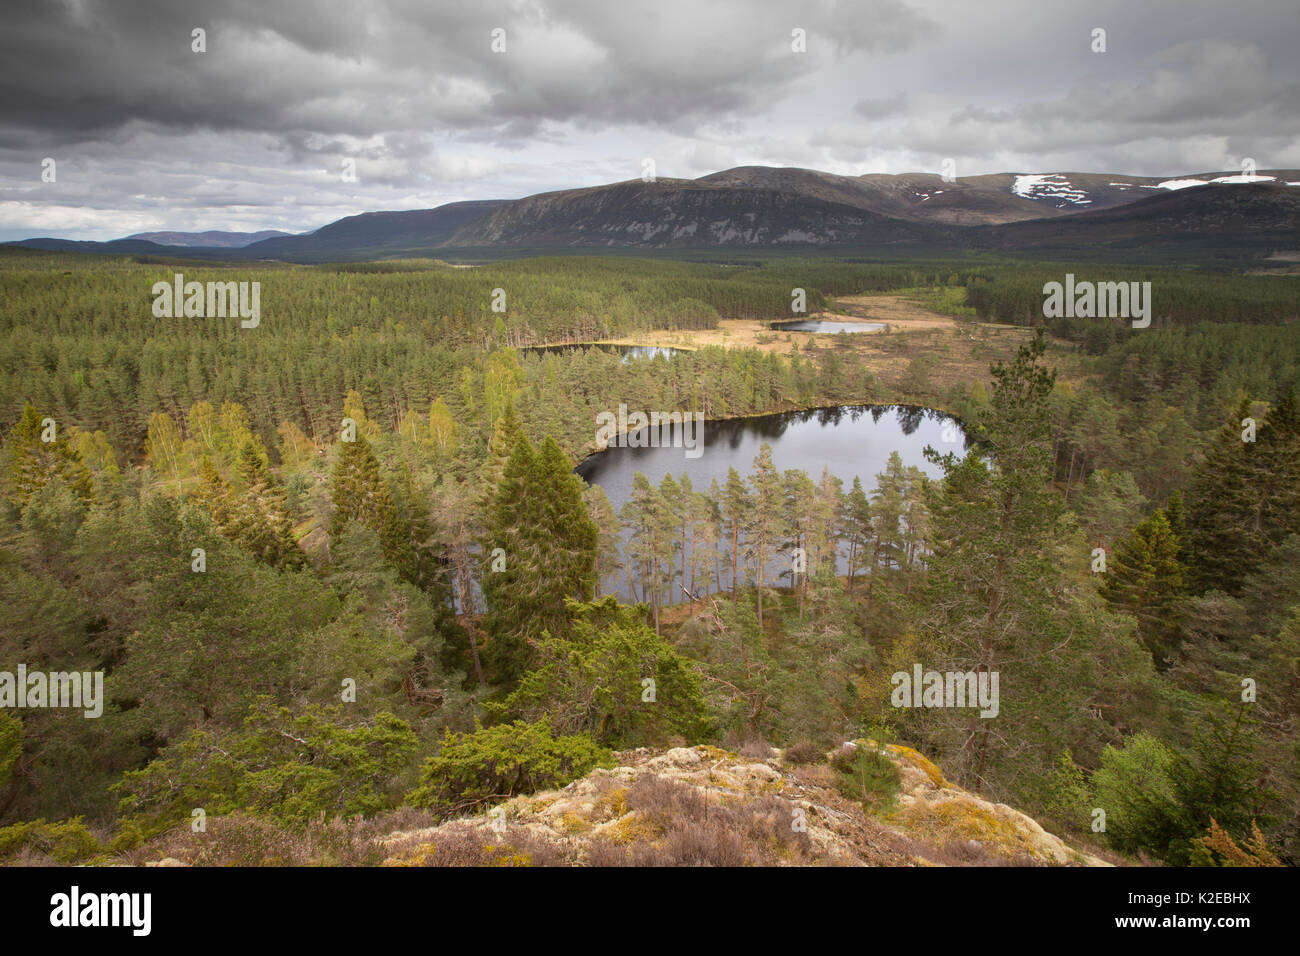 Uath Lochans surrounded by Scots pine (Pinus sylvestris) woodland, Glenfeshie, Cairngorms National Park, Scotland, UK, May 2014. Stock Photo